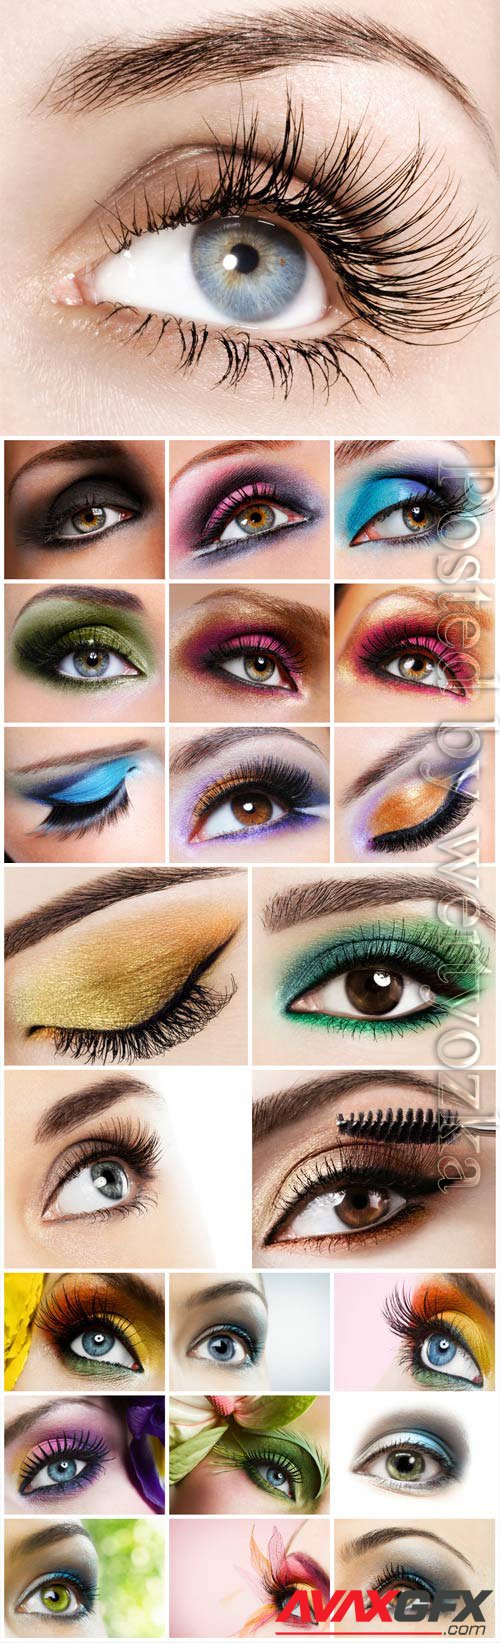 Eyes and makeup stock photo